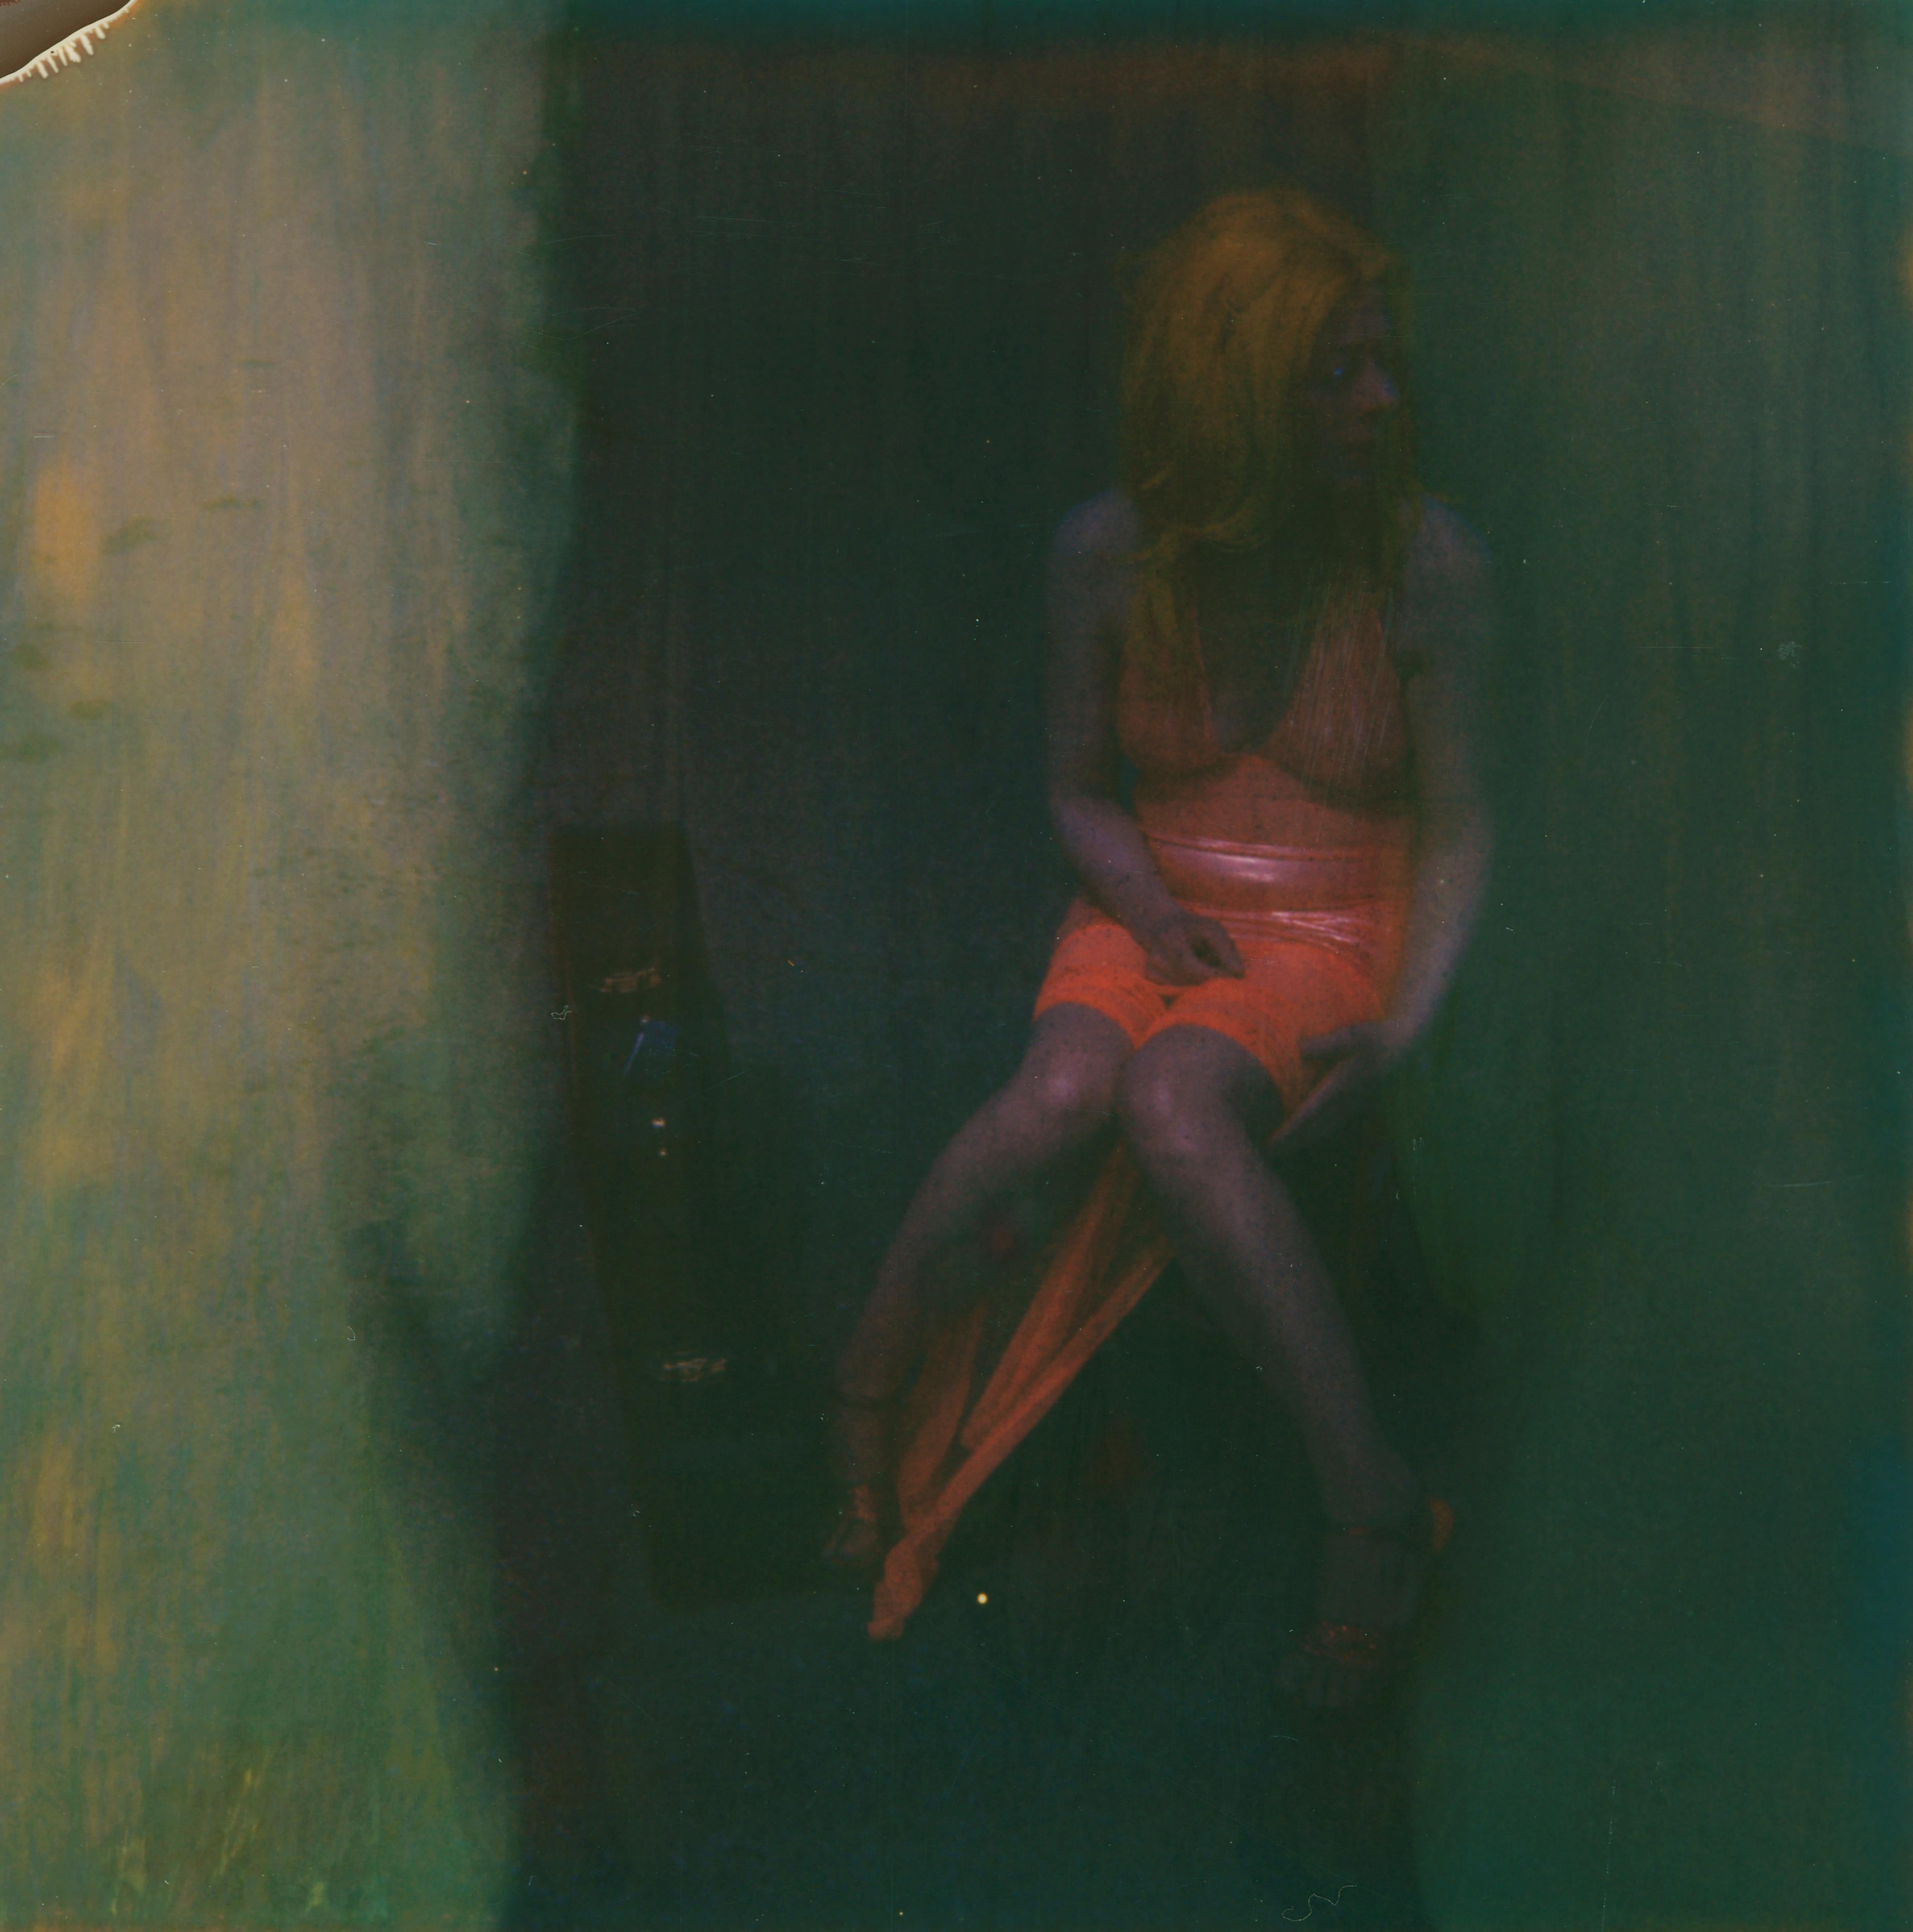 Stefanie Schneider Figurative Photograph - Max hitches into Town (29 Palms, CA) analog, mounted